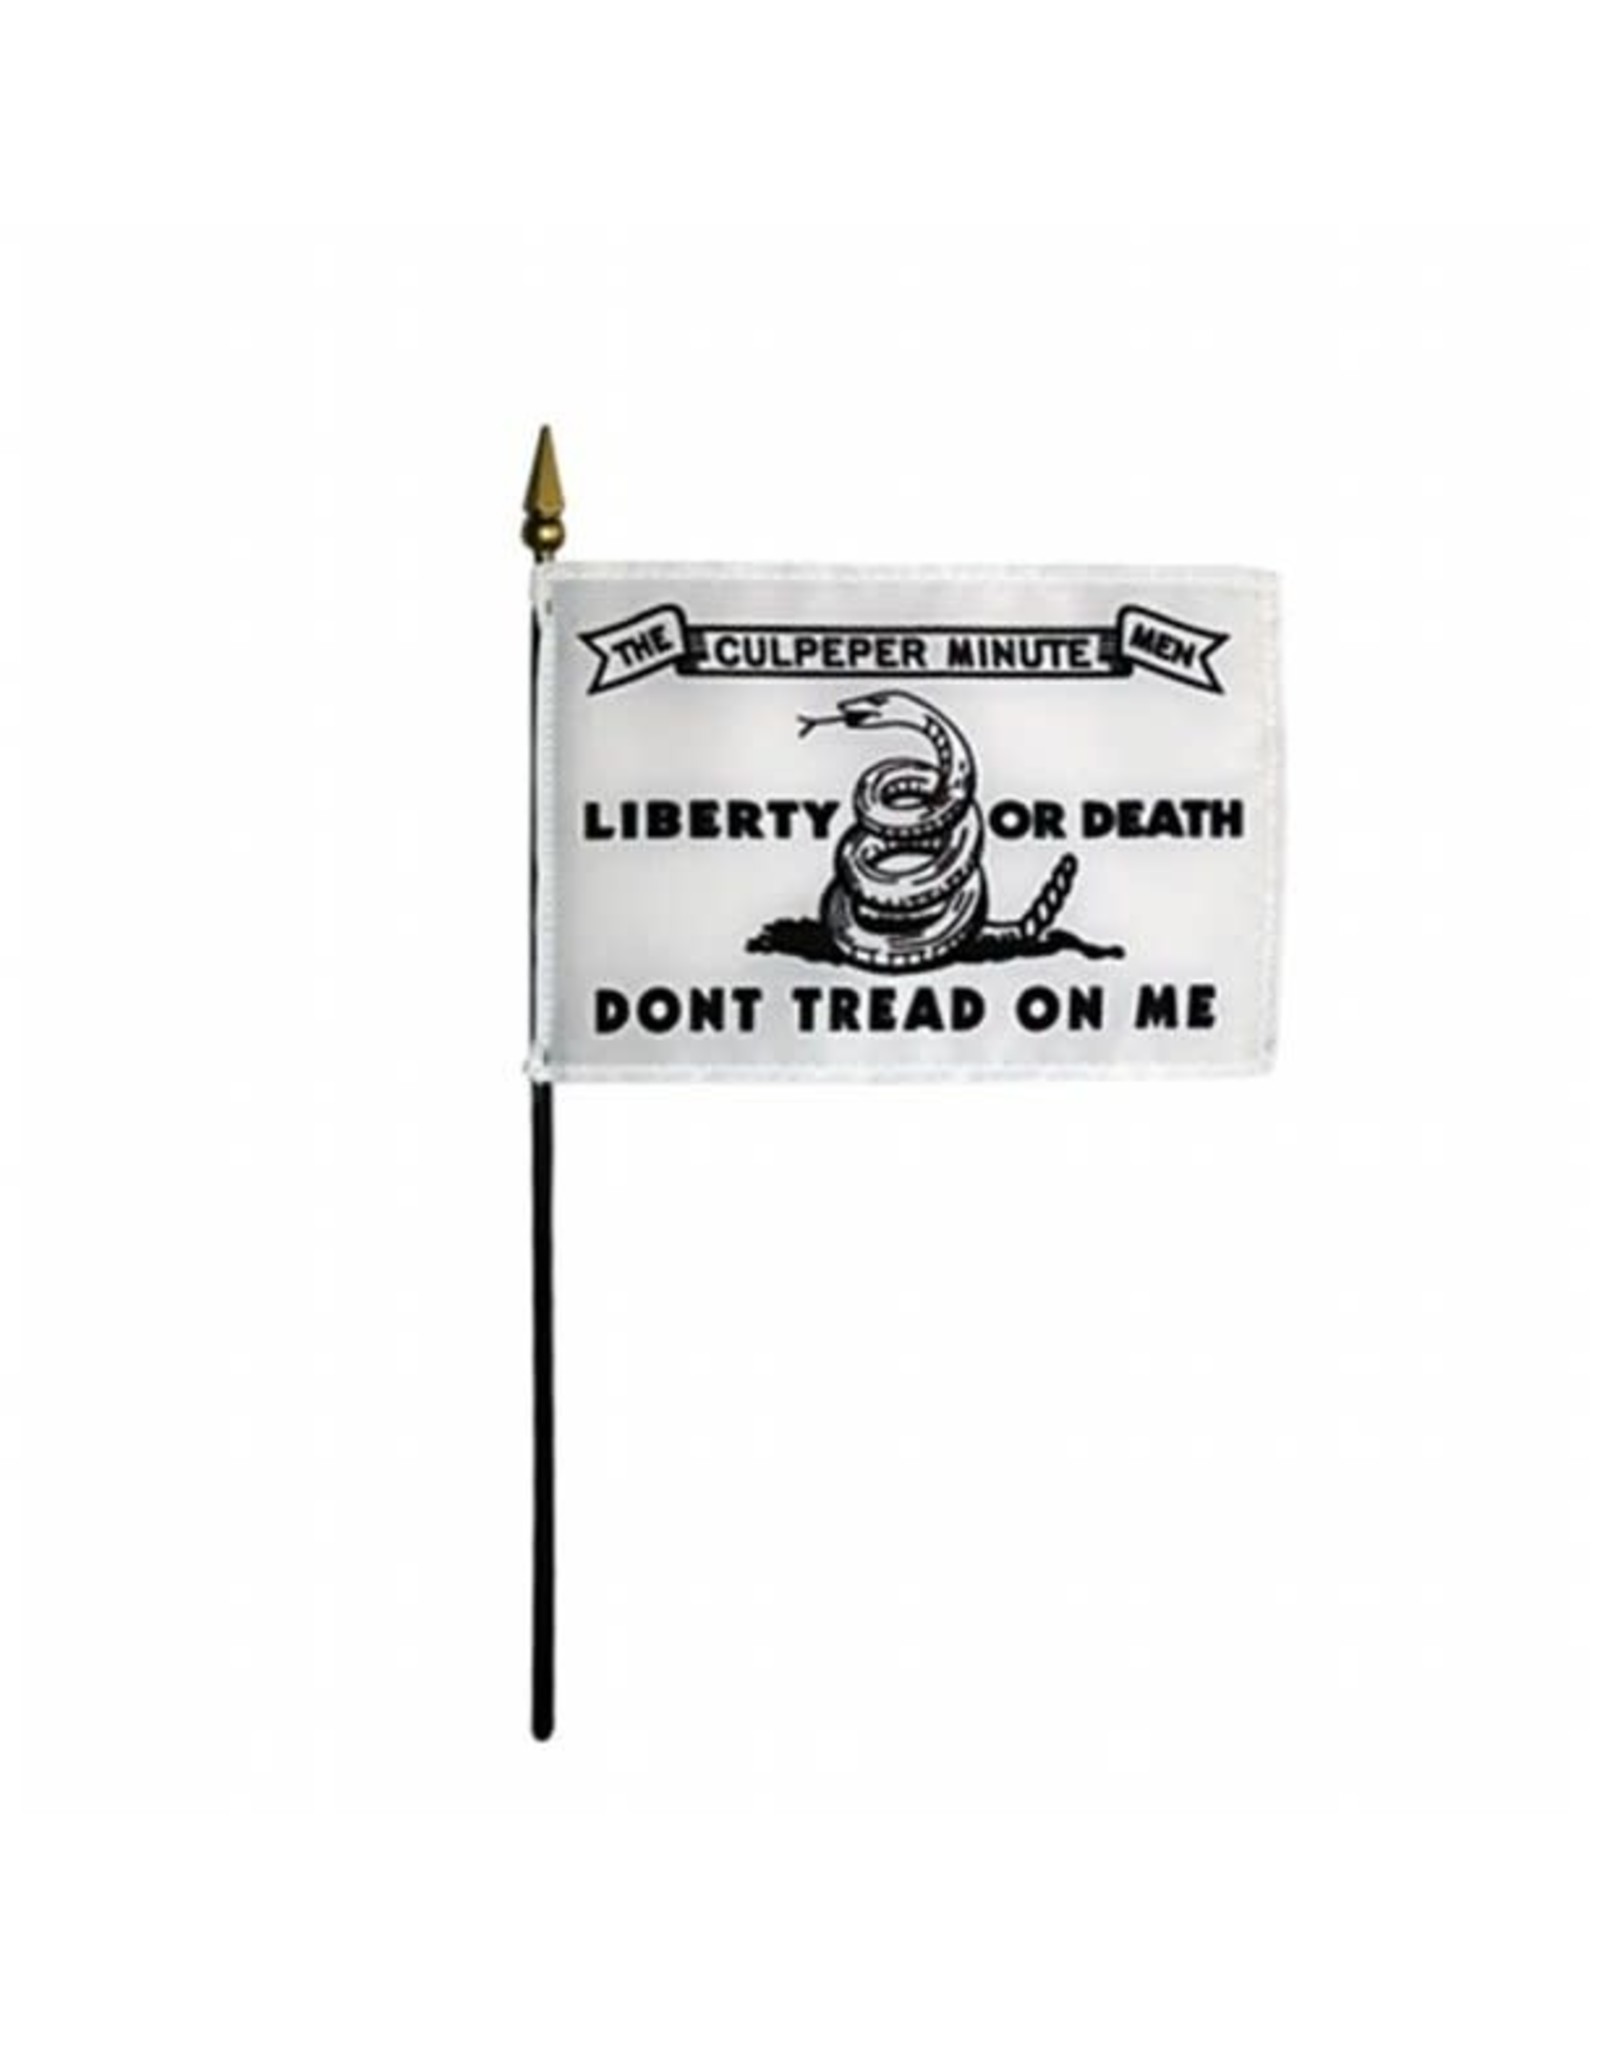 Annin 4" x 6" Culpeper Minute Men 1775 "Don't Tread on Me" Flag Mounted on Stick